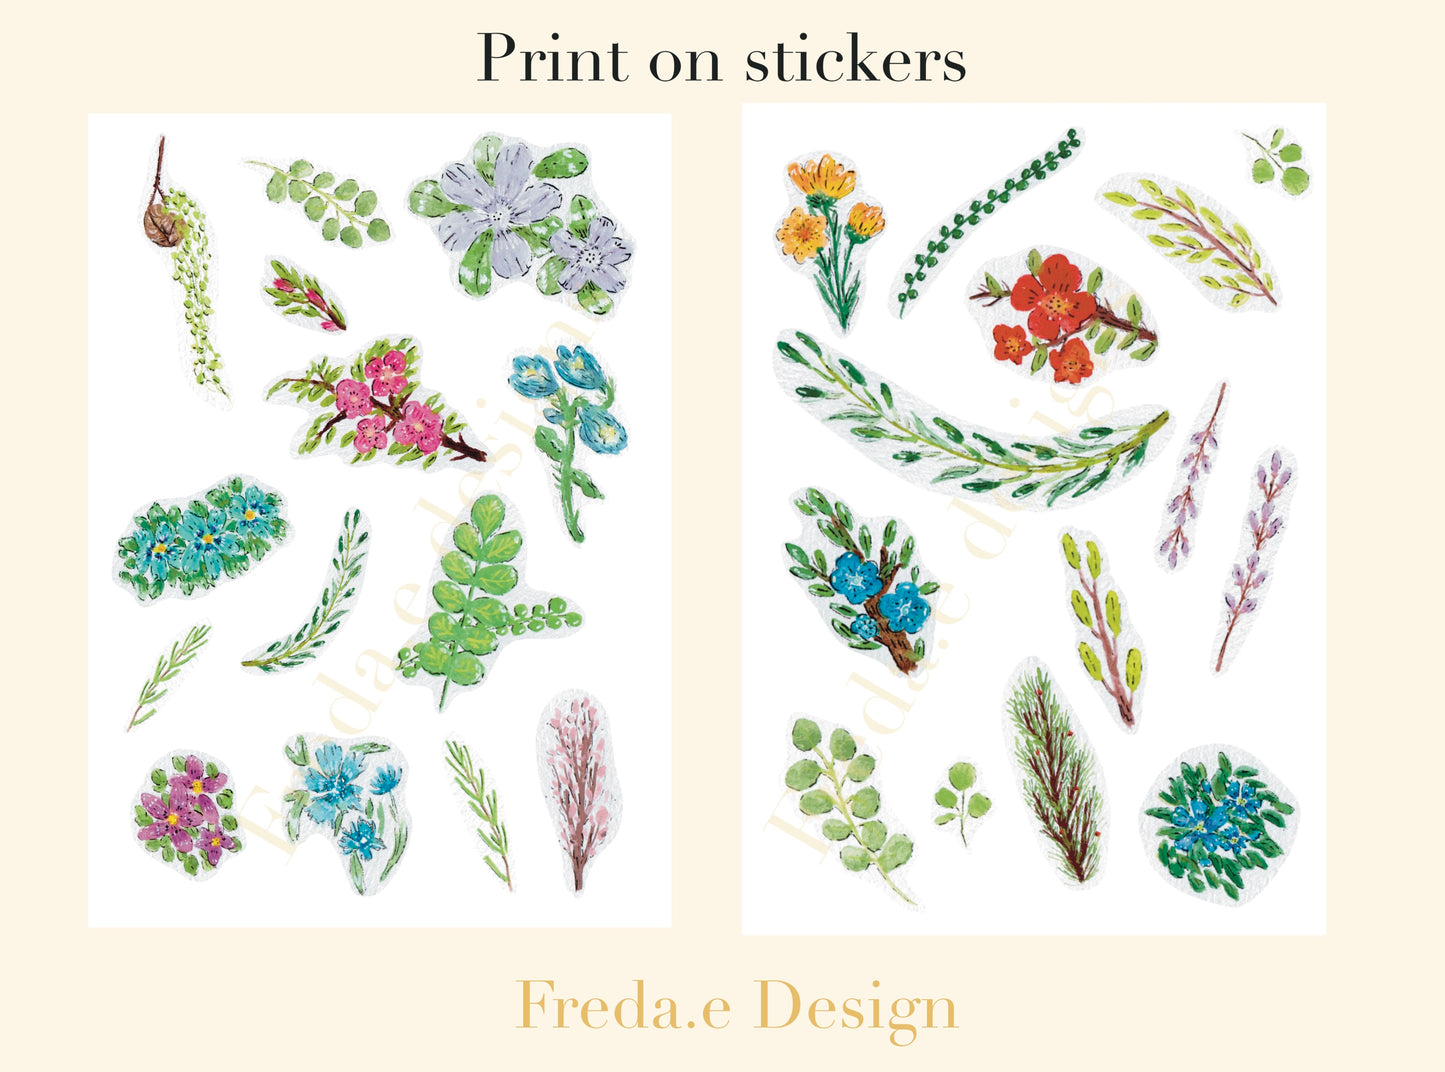 Goauche Flowers- Rub-on Stickers/ Transfer Stickers006 and 007 (LFSO)